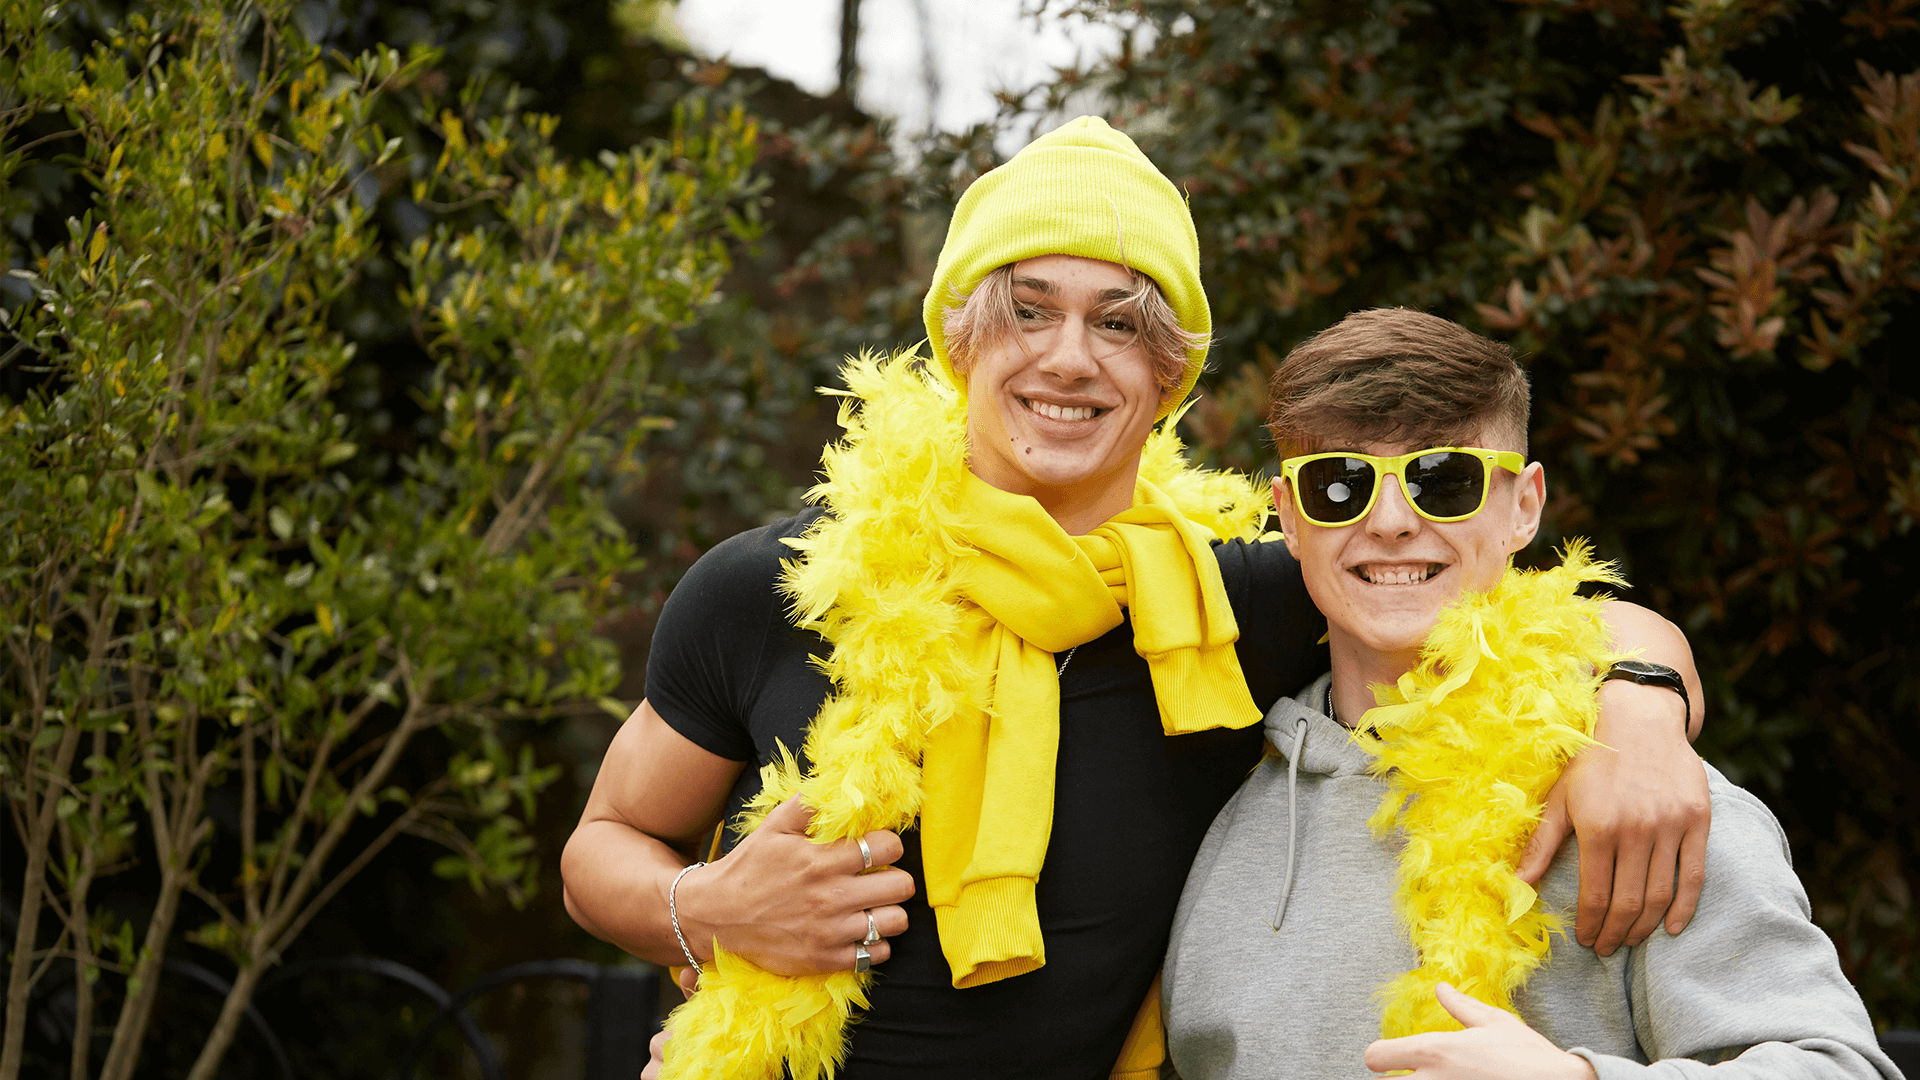 An image of two boys dressed up with yellow feather boas, a yellow hat and yellow sunglasses